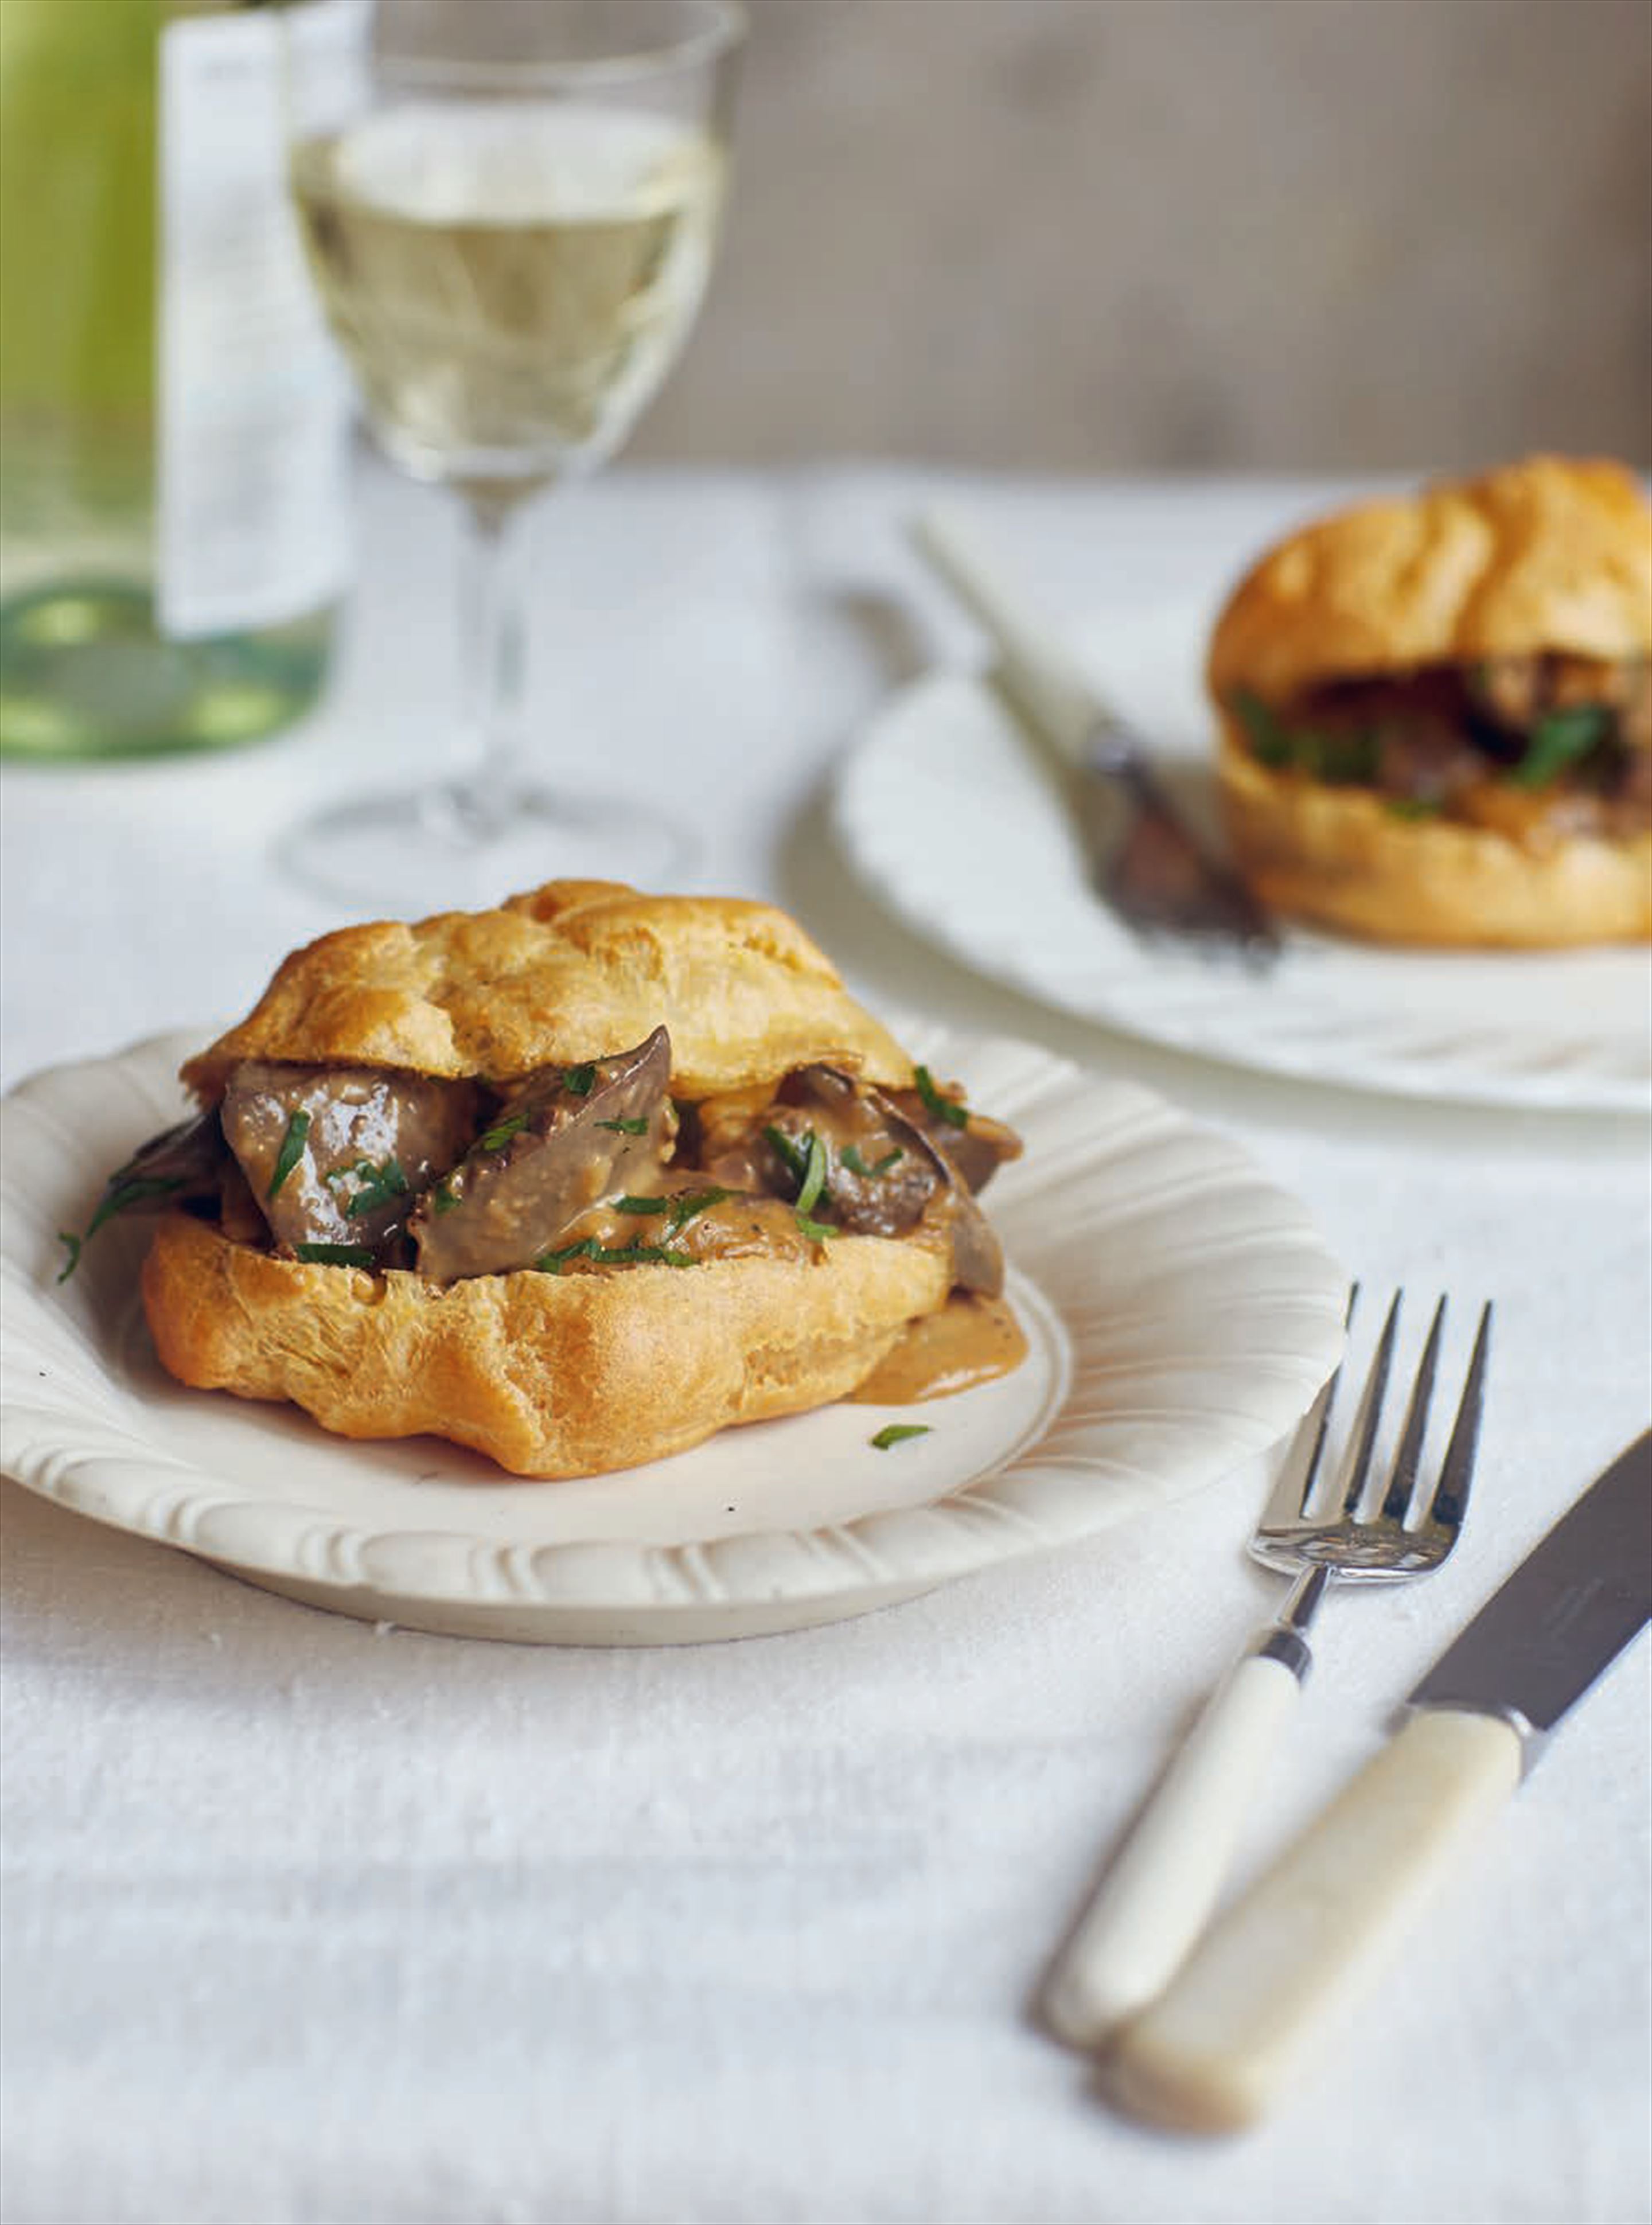 Choux pastry with chicken livers, cream & lemon